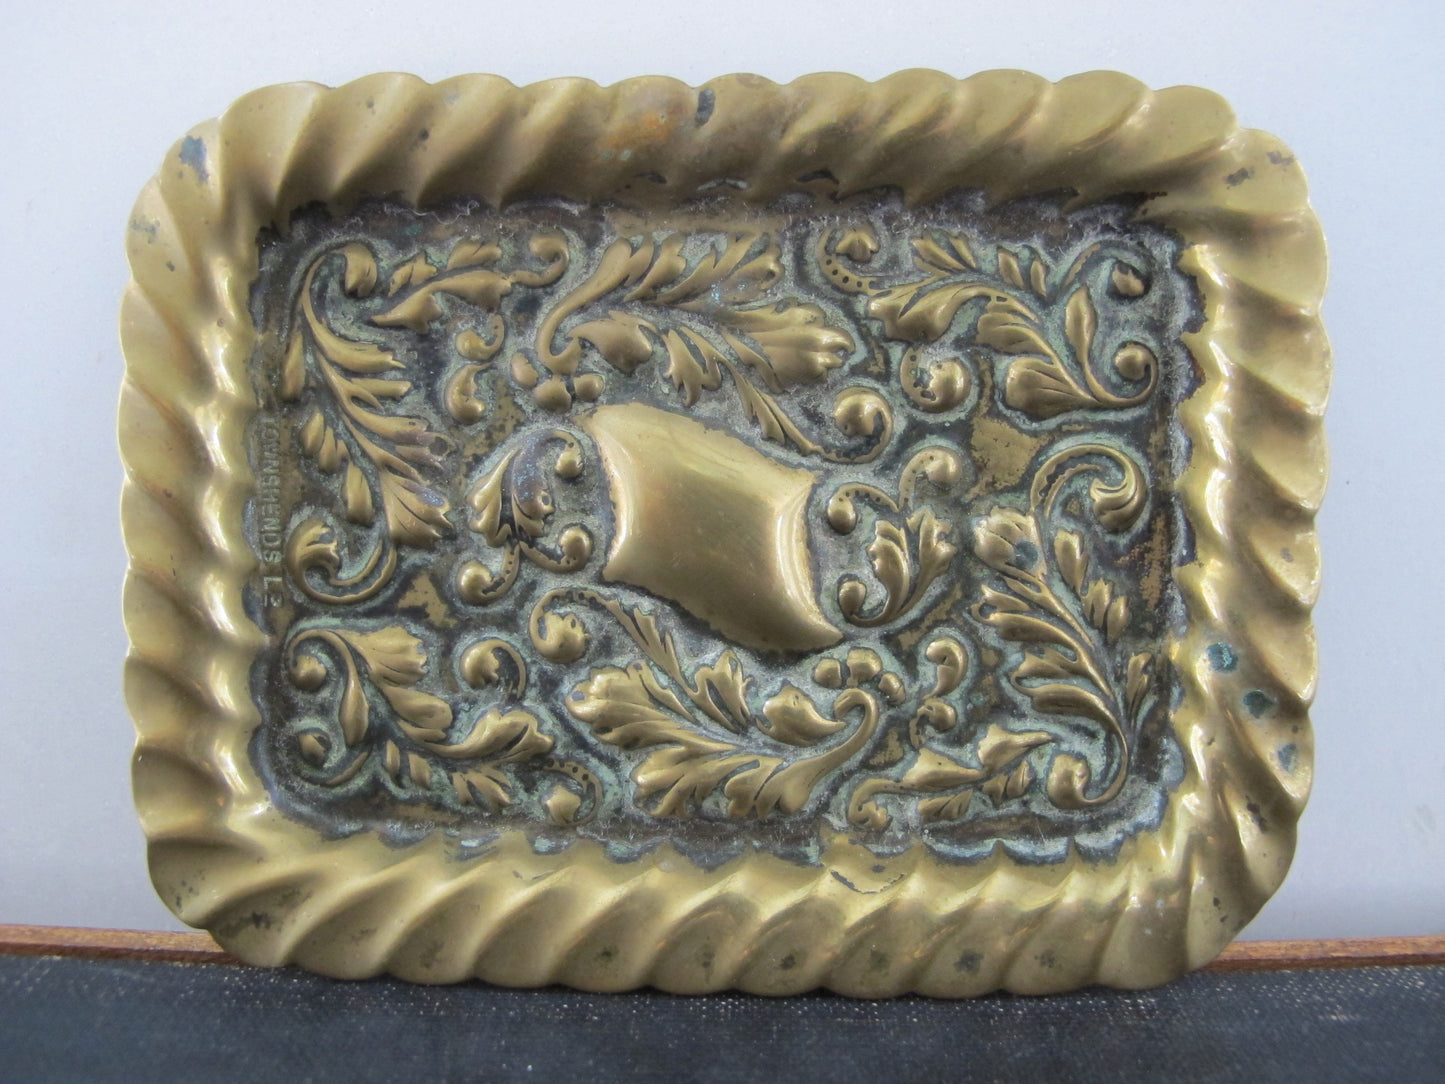 Victorian Edwardian Repousse Card Tray Signed Townshends Limited Miniature 1890s